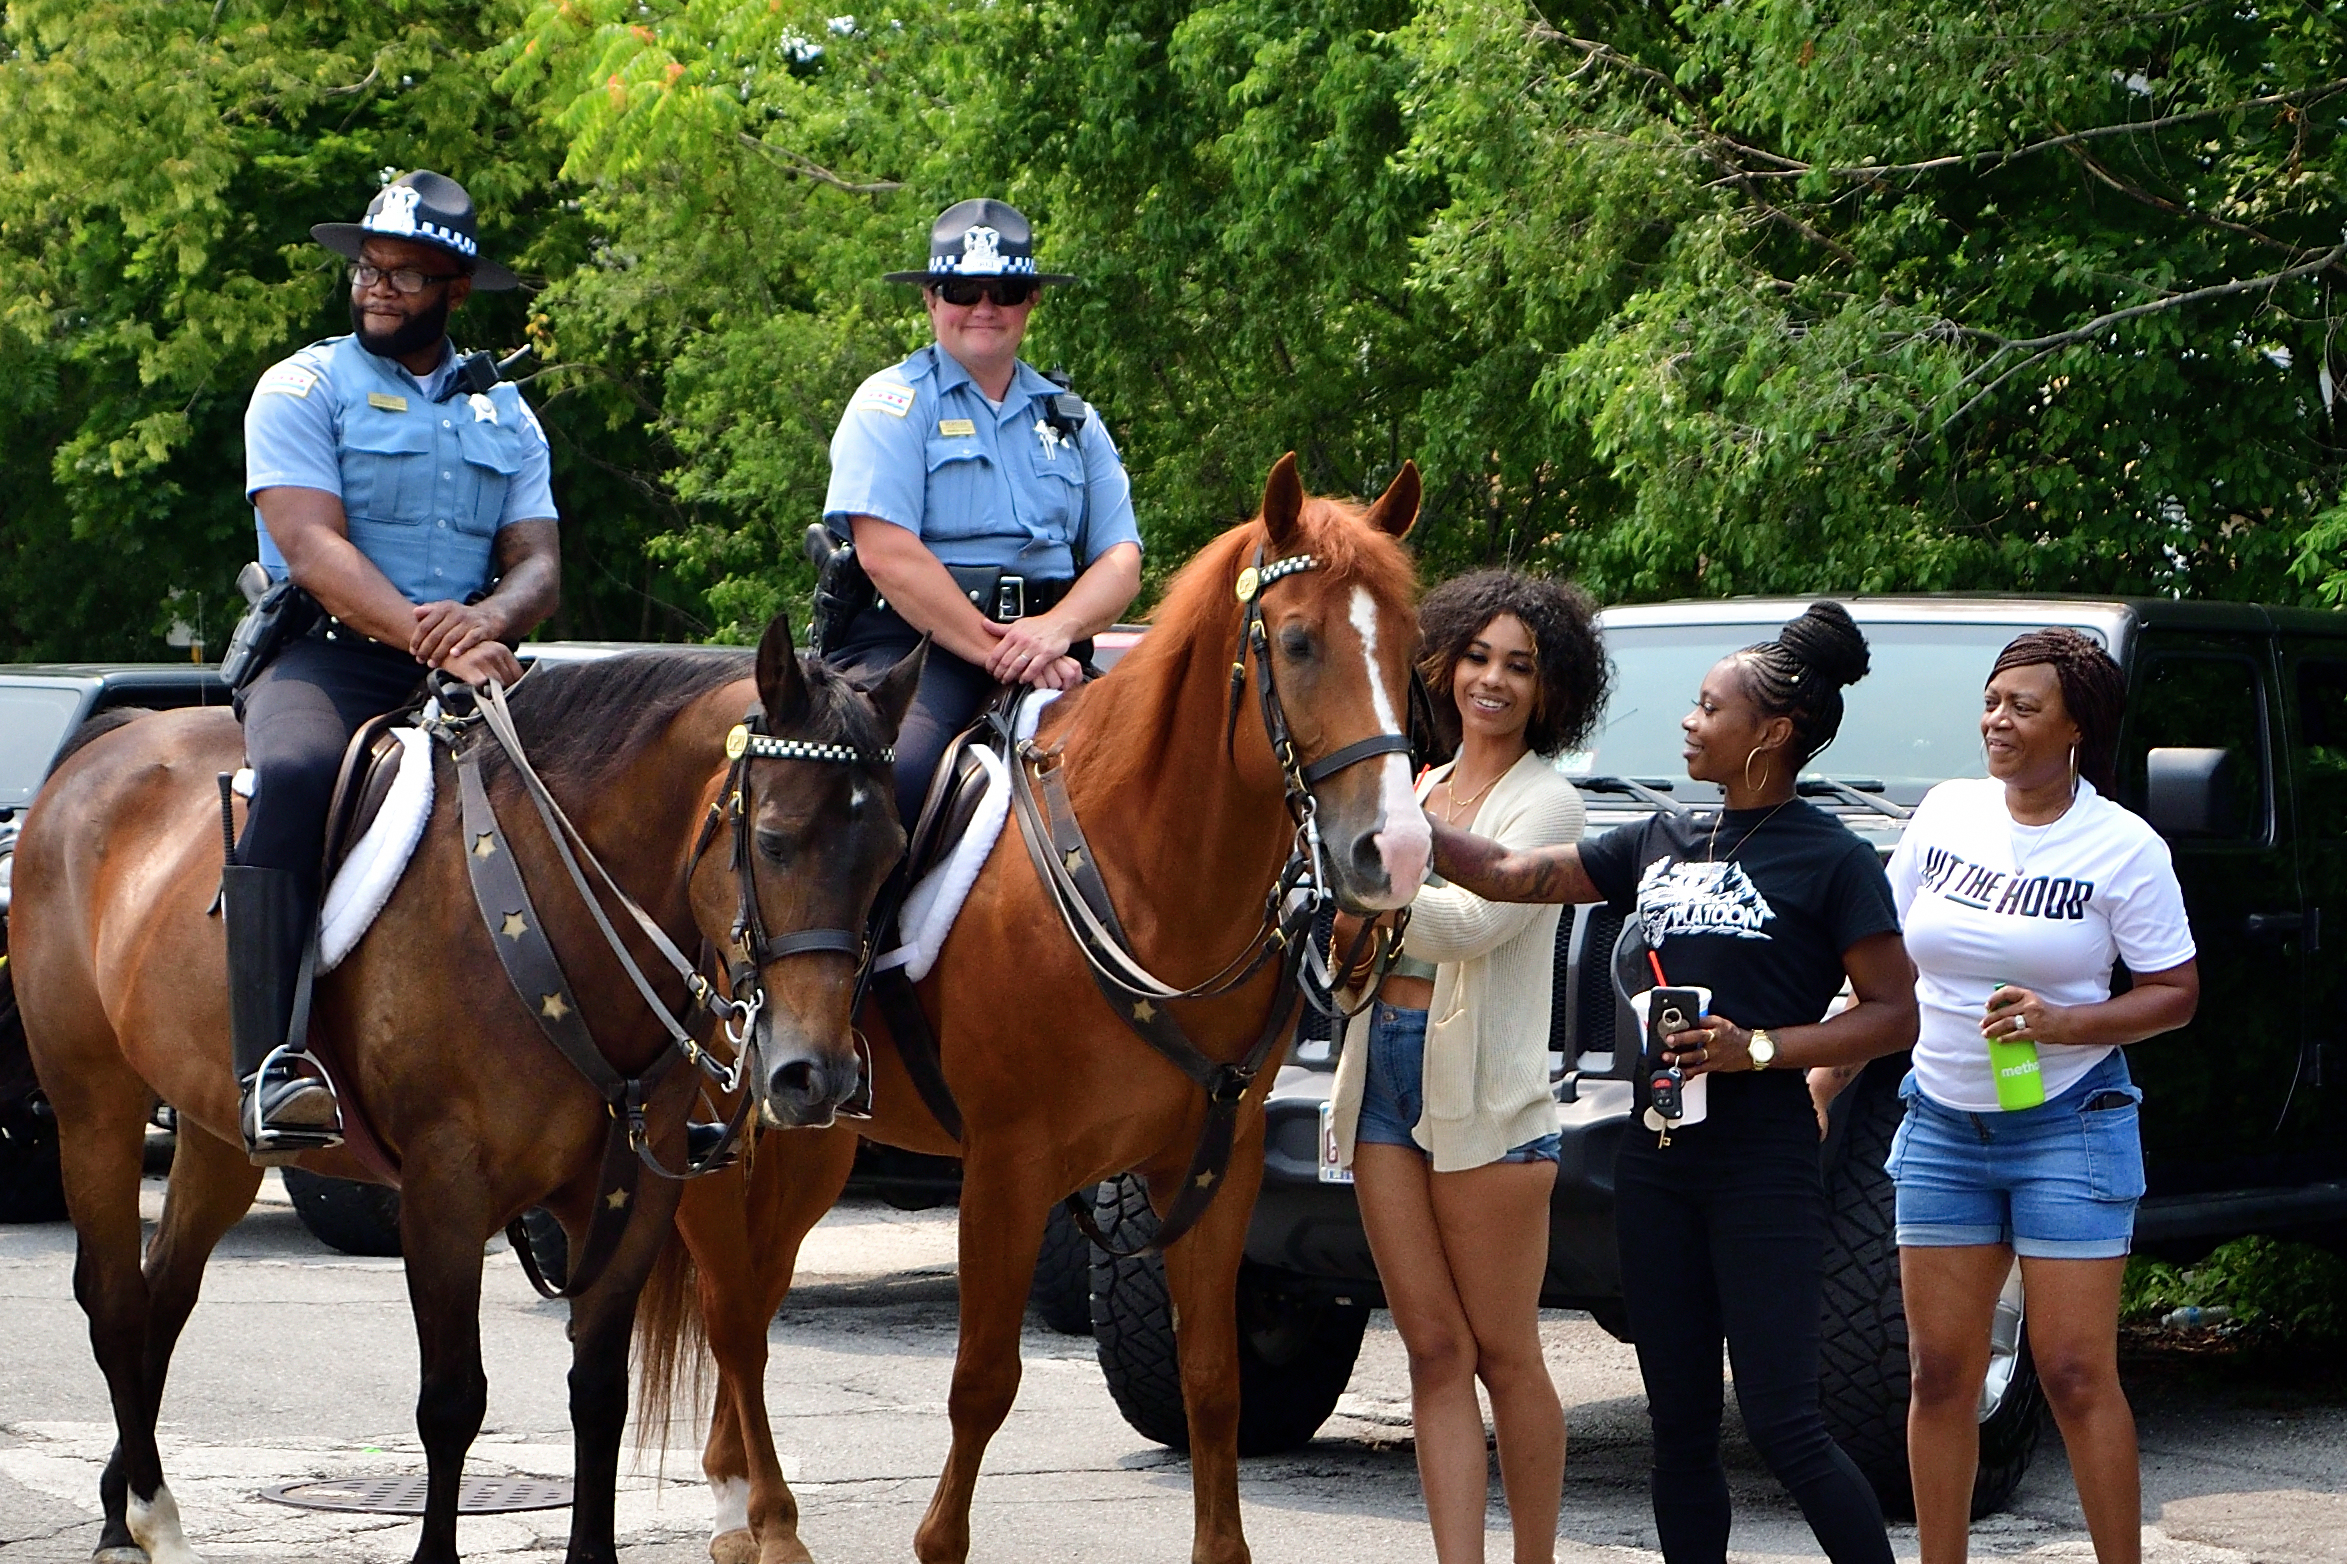 Community Festival 2021, 5th District Chicago Police Headquarters, July 17, 2021 (pic by Emi Yamamoto)